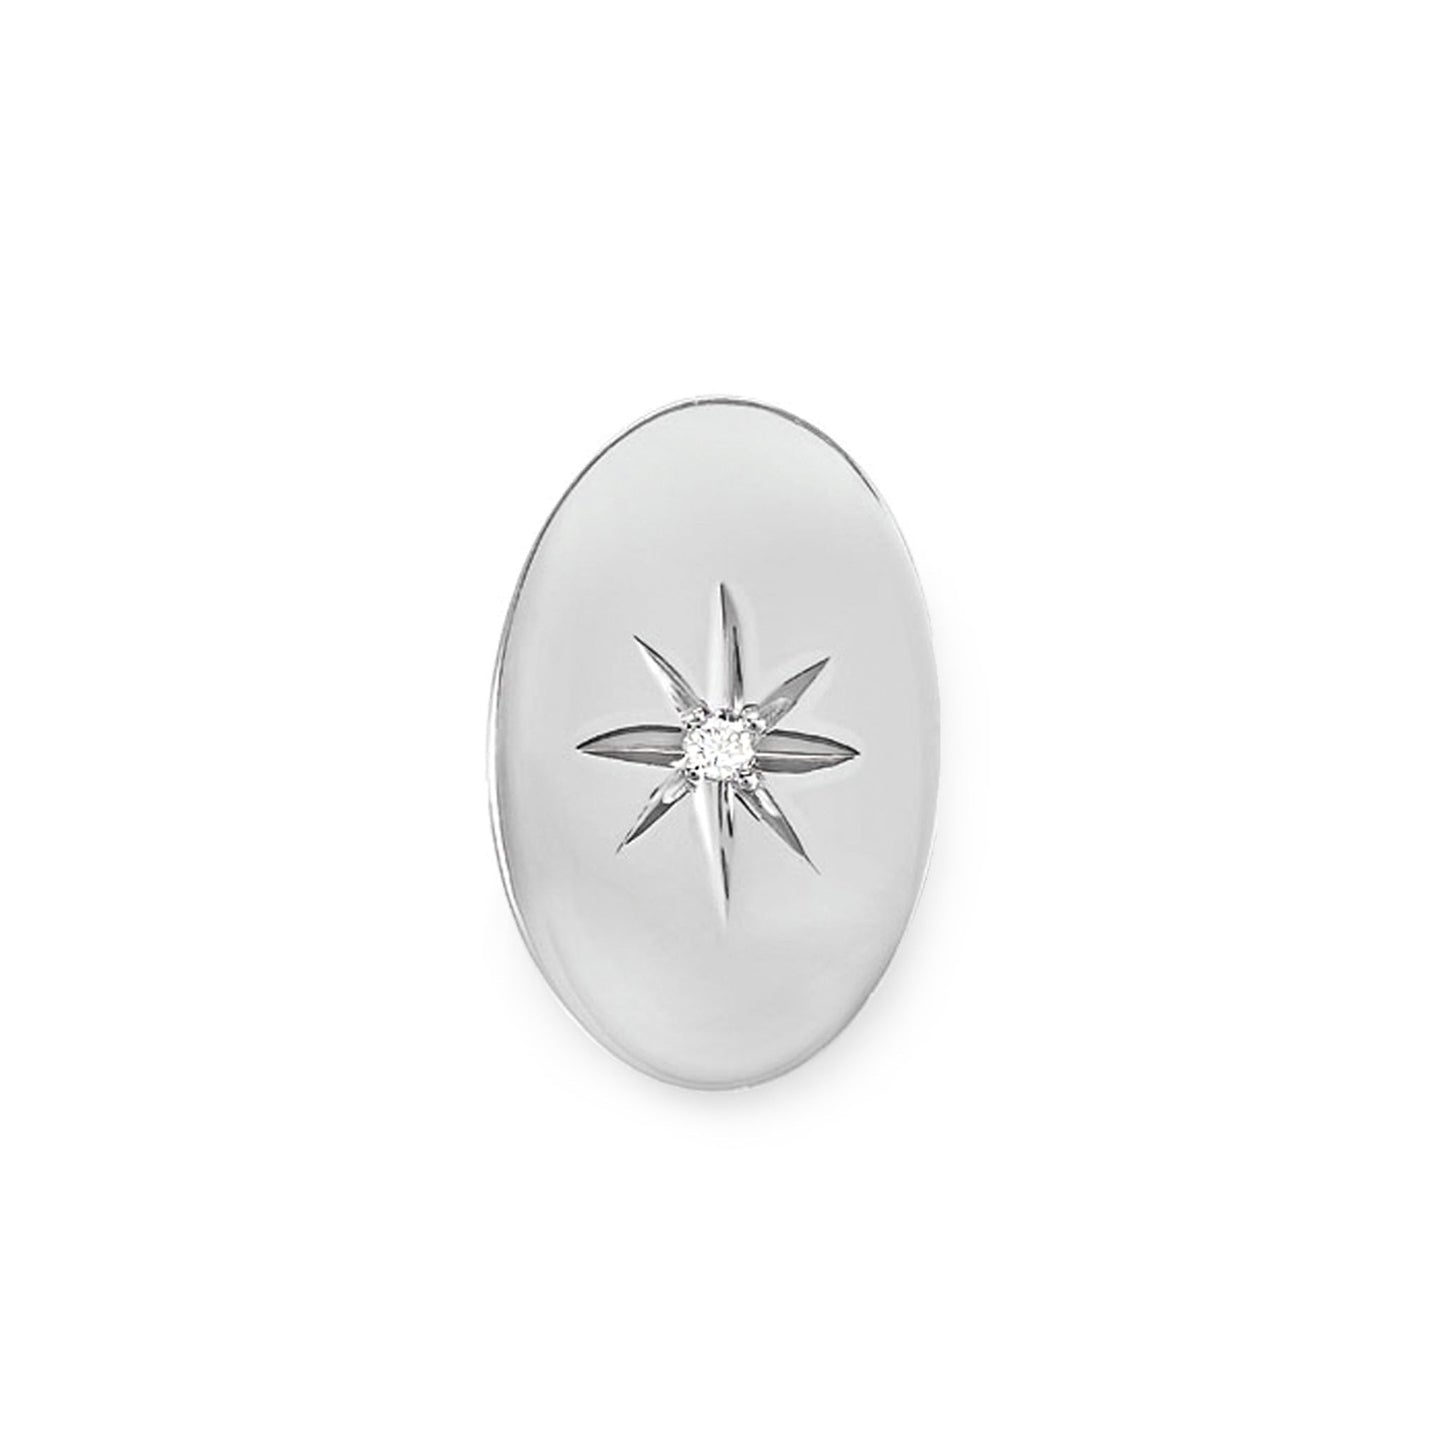 A sterling silver plain polished oval tie tack displayed on a neutral white background.